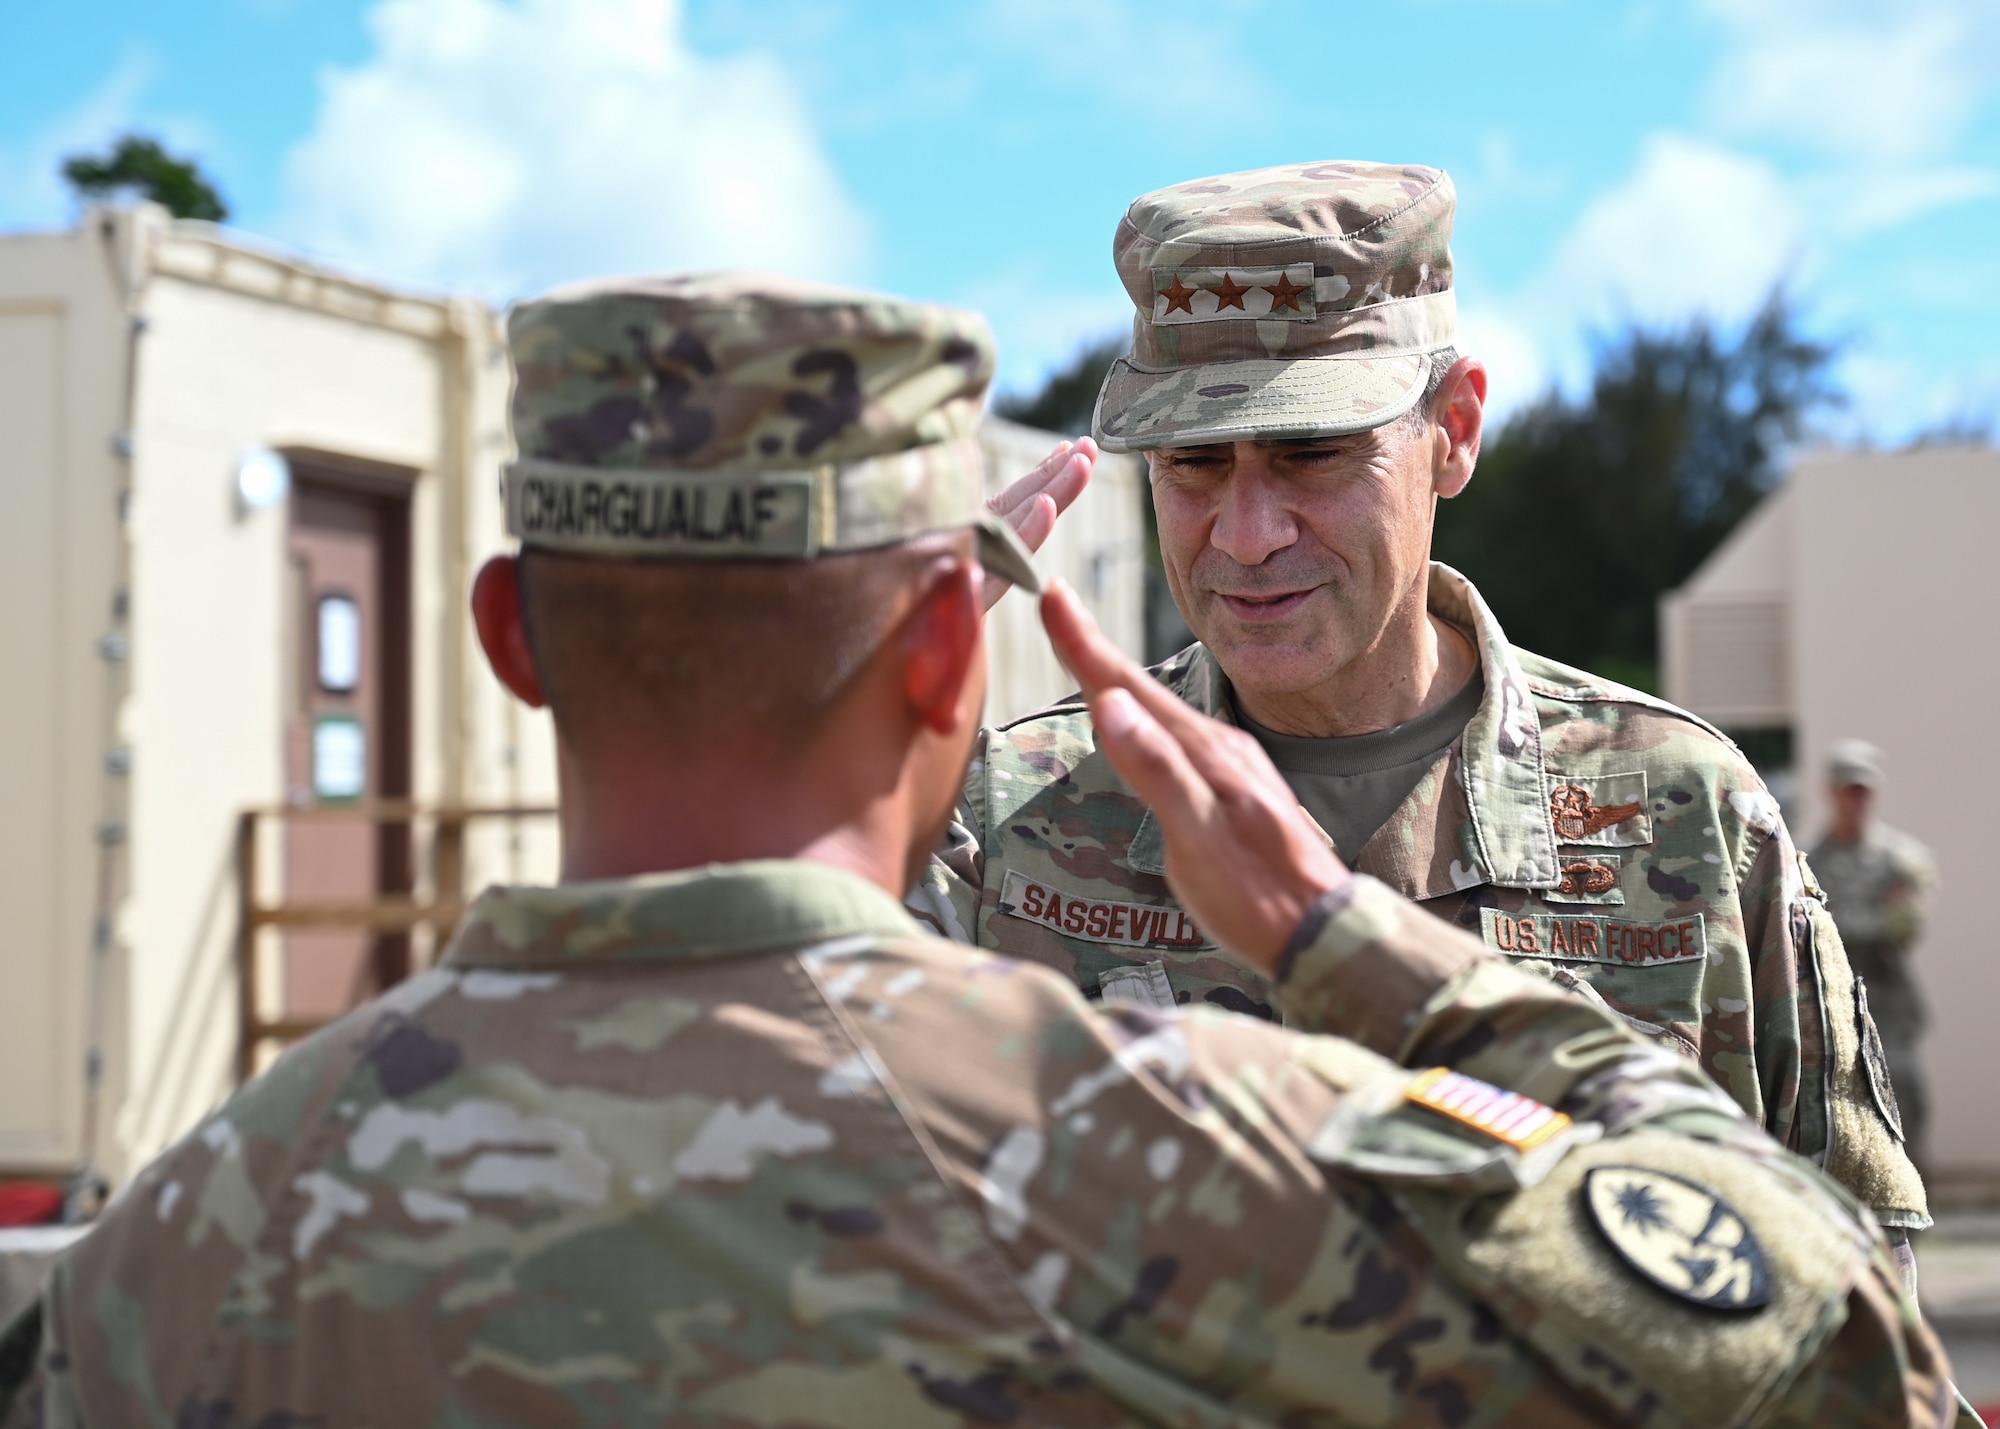 U.S. Air Force Lt. Gen. Marc Sasseville, vice chief of the National Guard Bureau, salutes a U.S. Army soldier at Andersen Air Force Base, Guam, June 22, 2022.